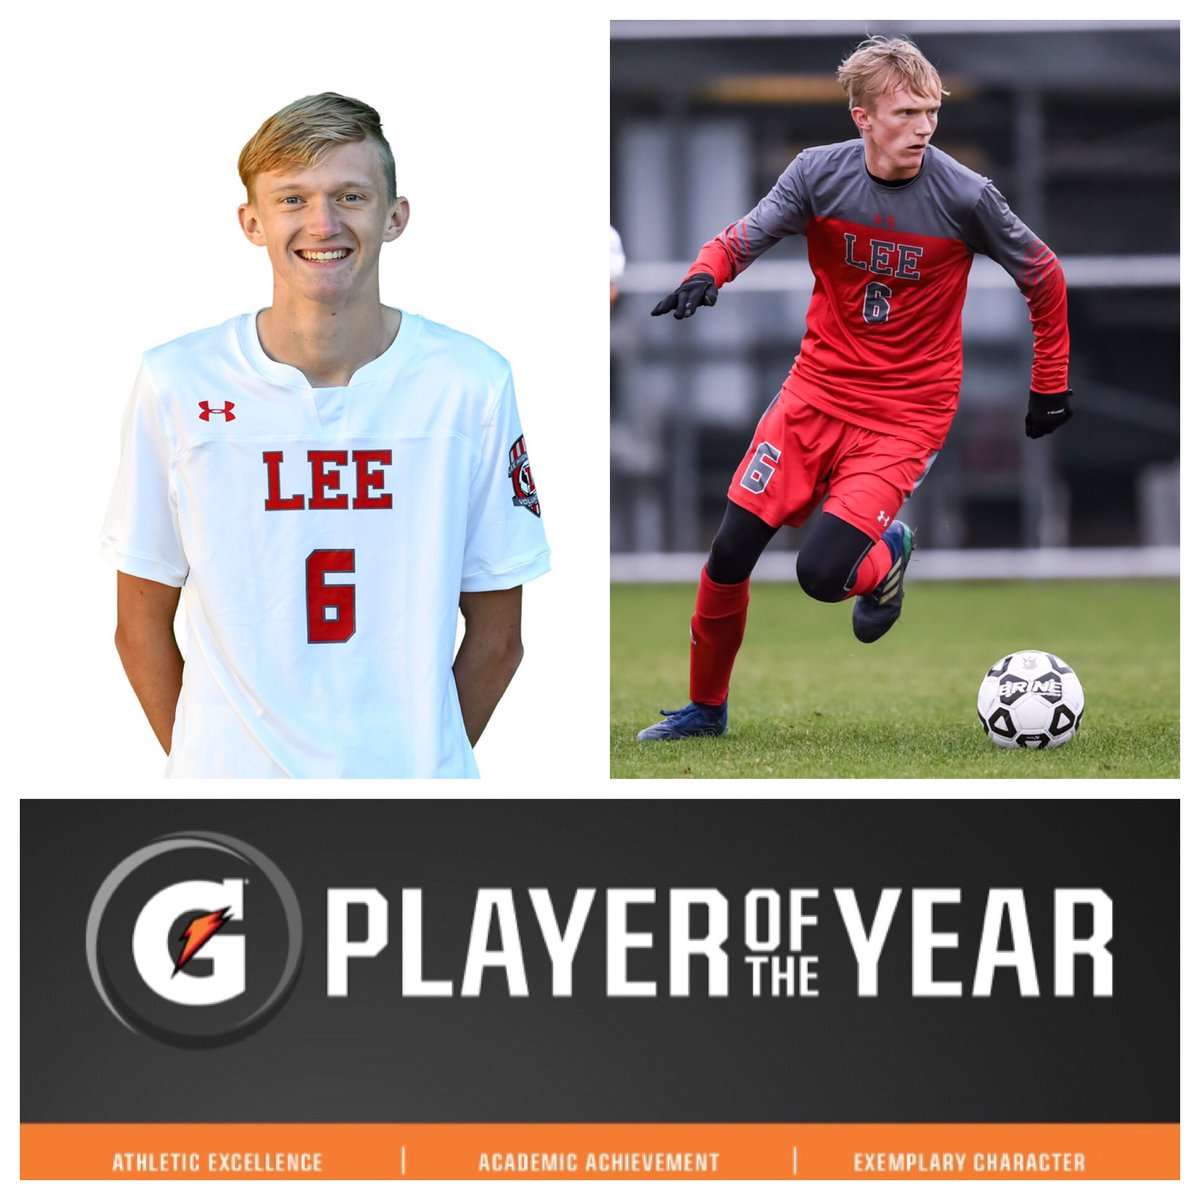 Thank you @Gatorade for honoring me with this prestigious award and giving me the opportunity to #PlayItForward by donating to a local sports charity! A huge thanks to @David77948870 and @sacitysc. #GatoradePOY #SACITYproud #NEISDathletics